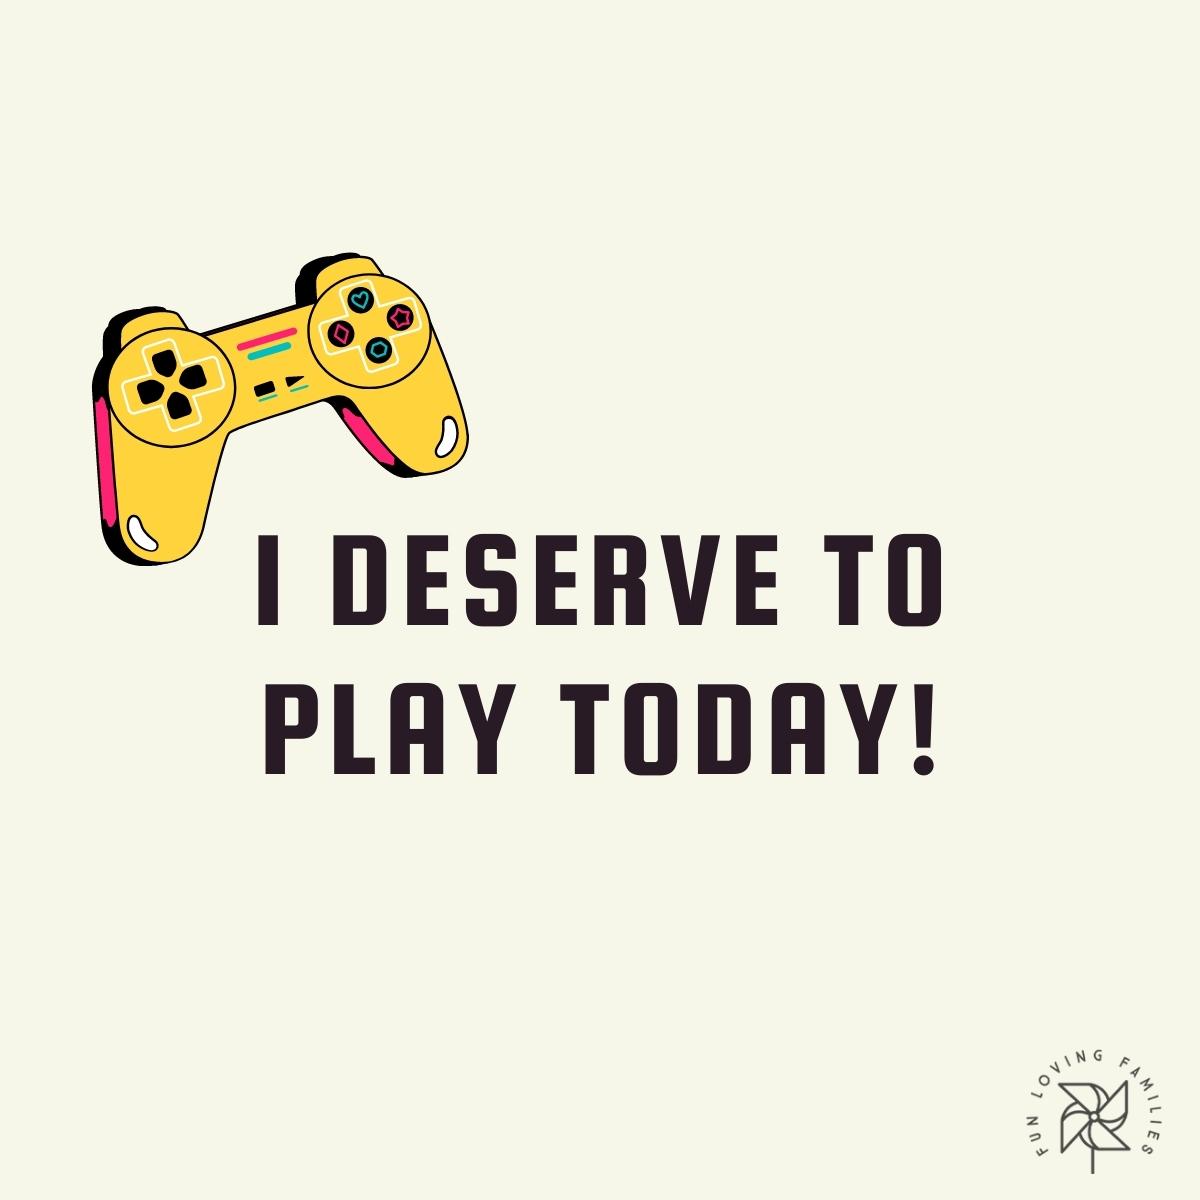 I deserve to play today affirmation